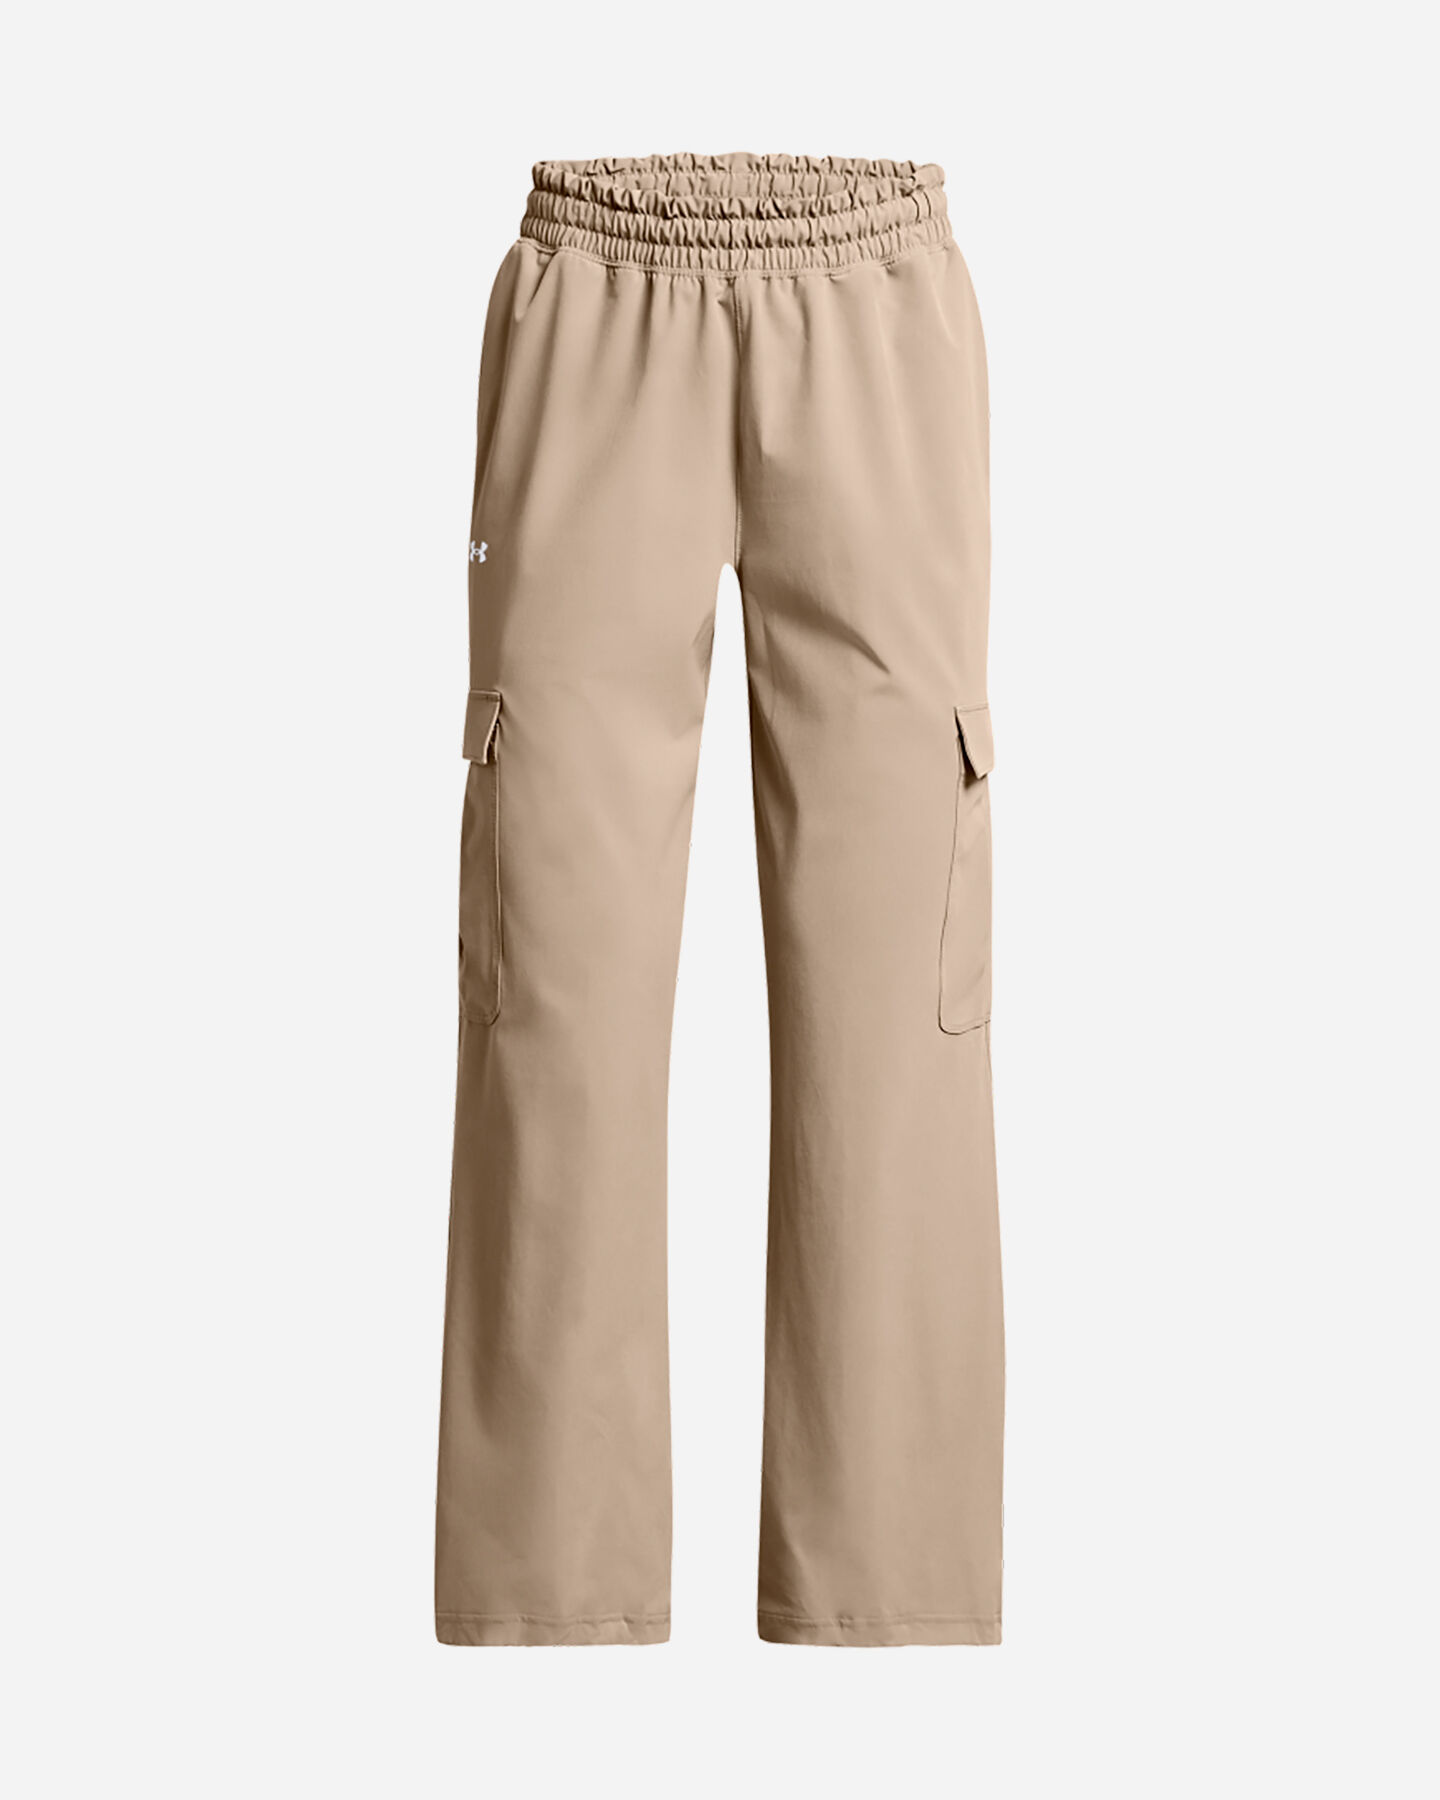  Pantalone UNDER ARMOUR WOVEN CARGO W S5641524|0203|XS scatto 0